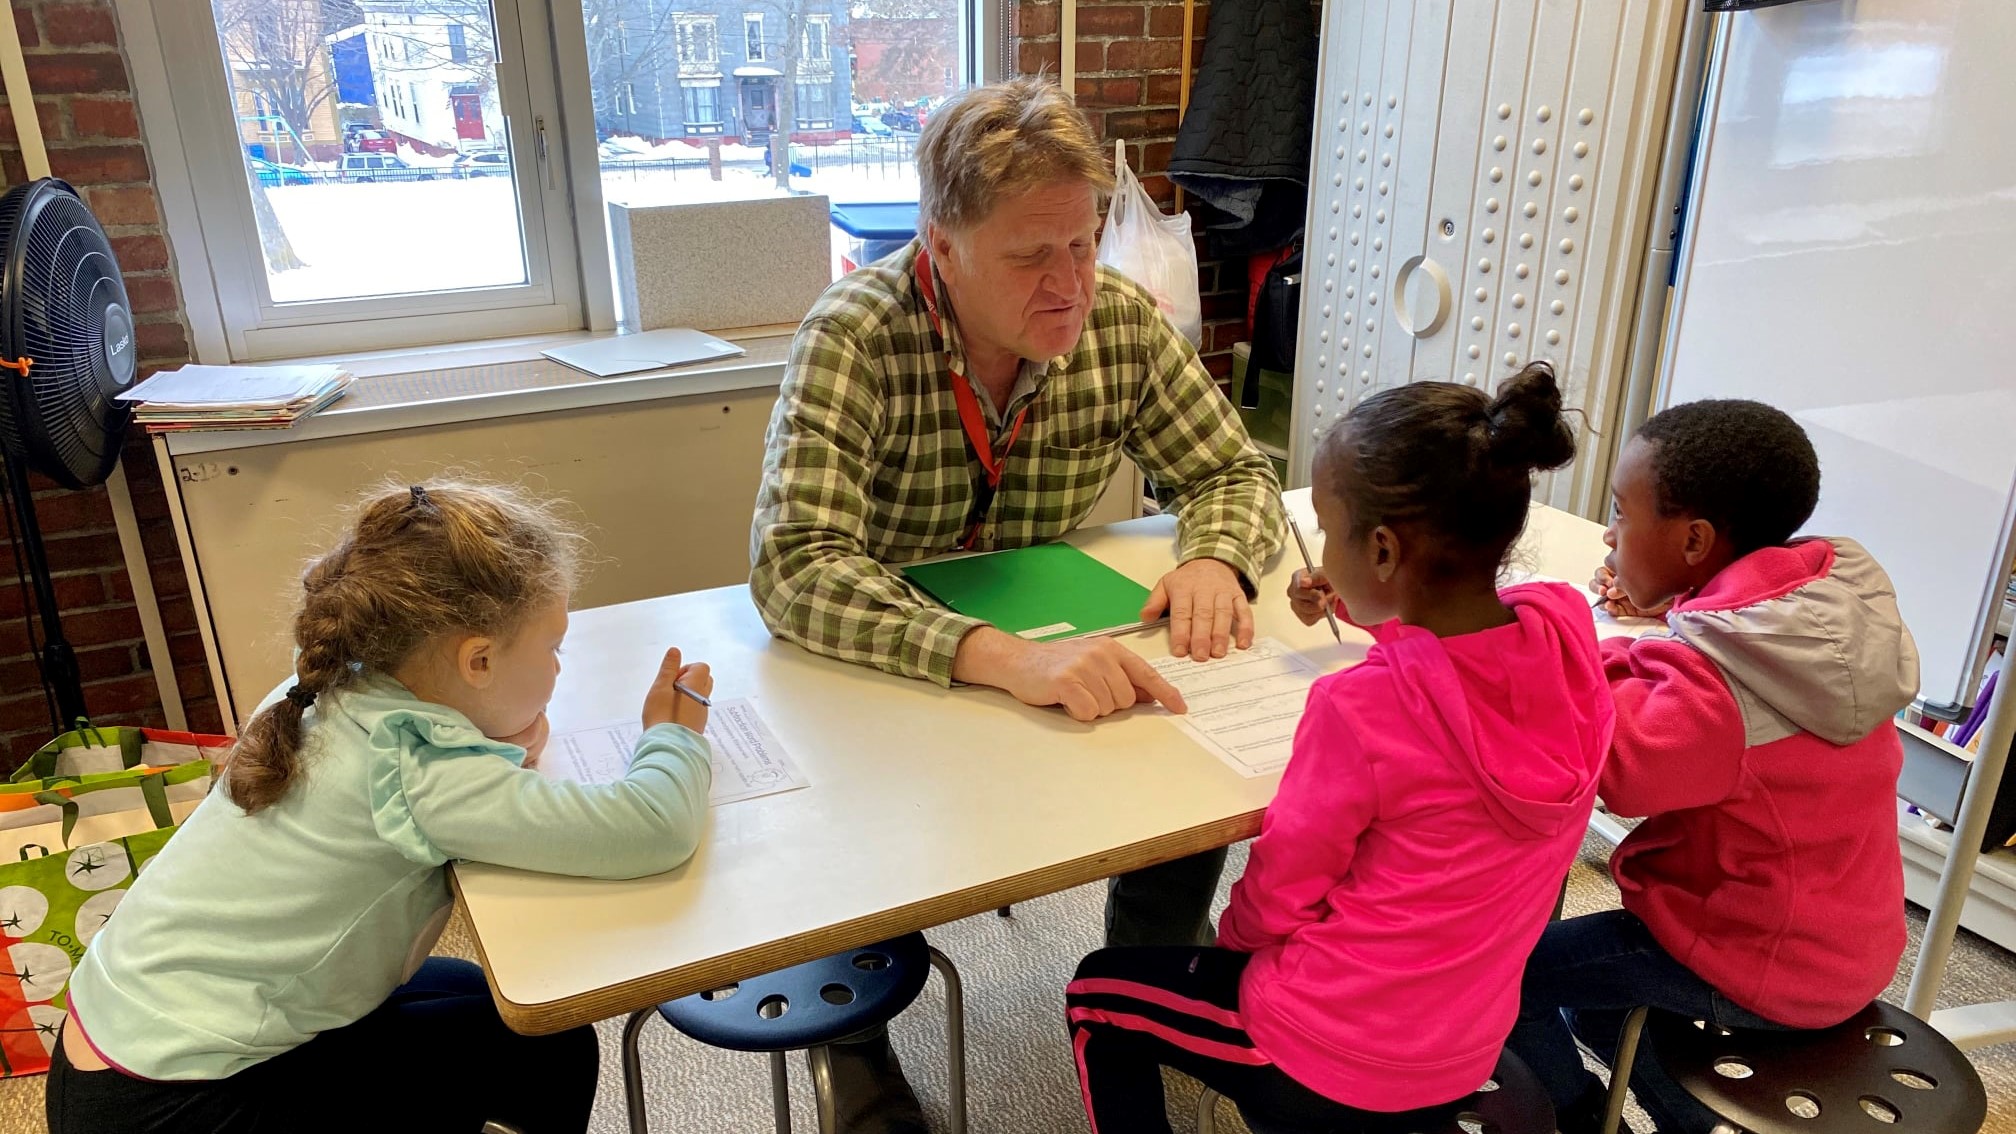 A teacher reads to three children at a table inside a classroom